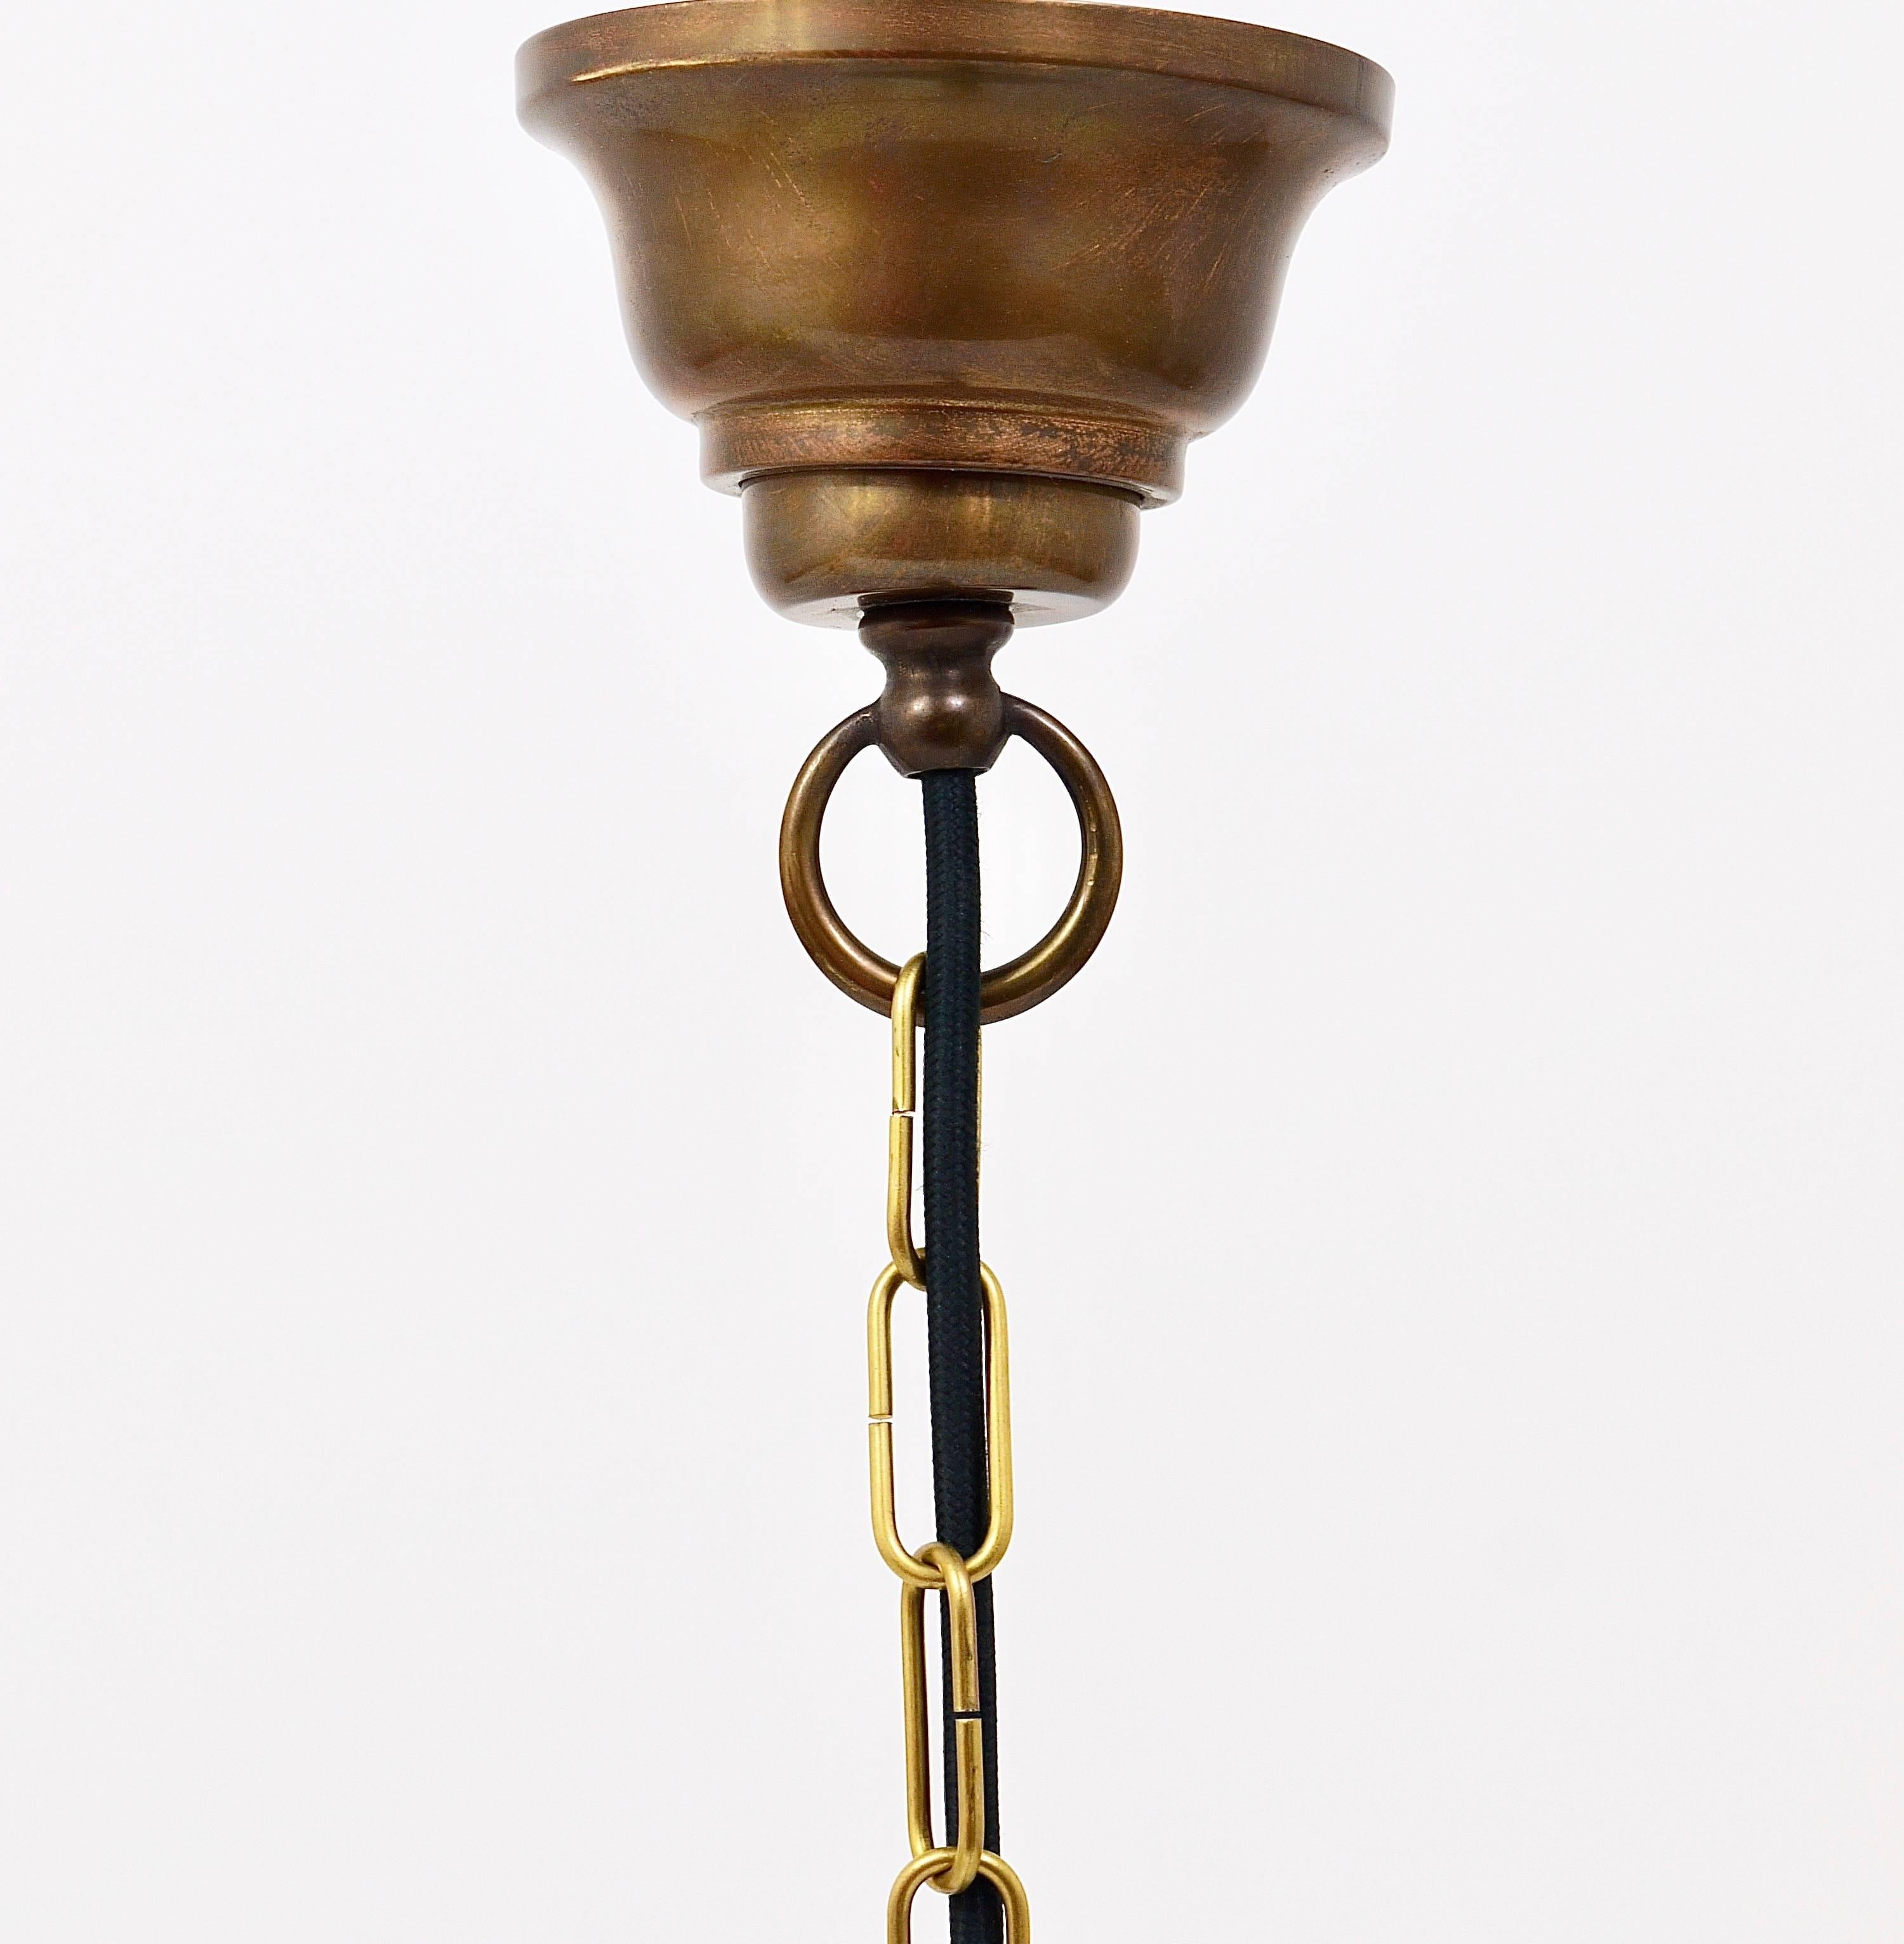 Brass Art Nouveau Pendant Lamp Lantern in the Manner of Adolf Loos, Knize, 1900s For Sale